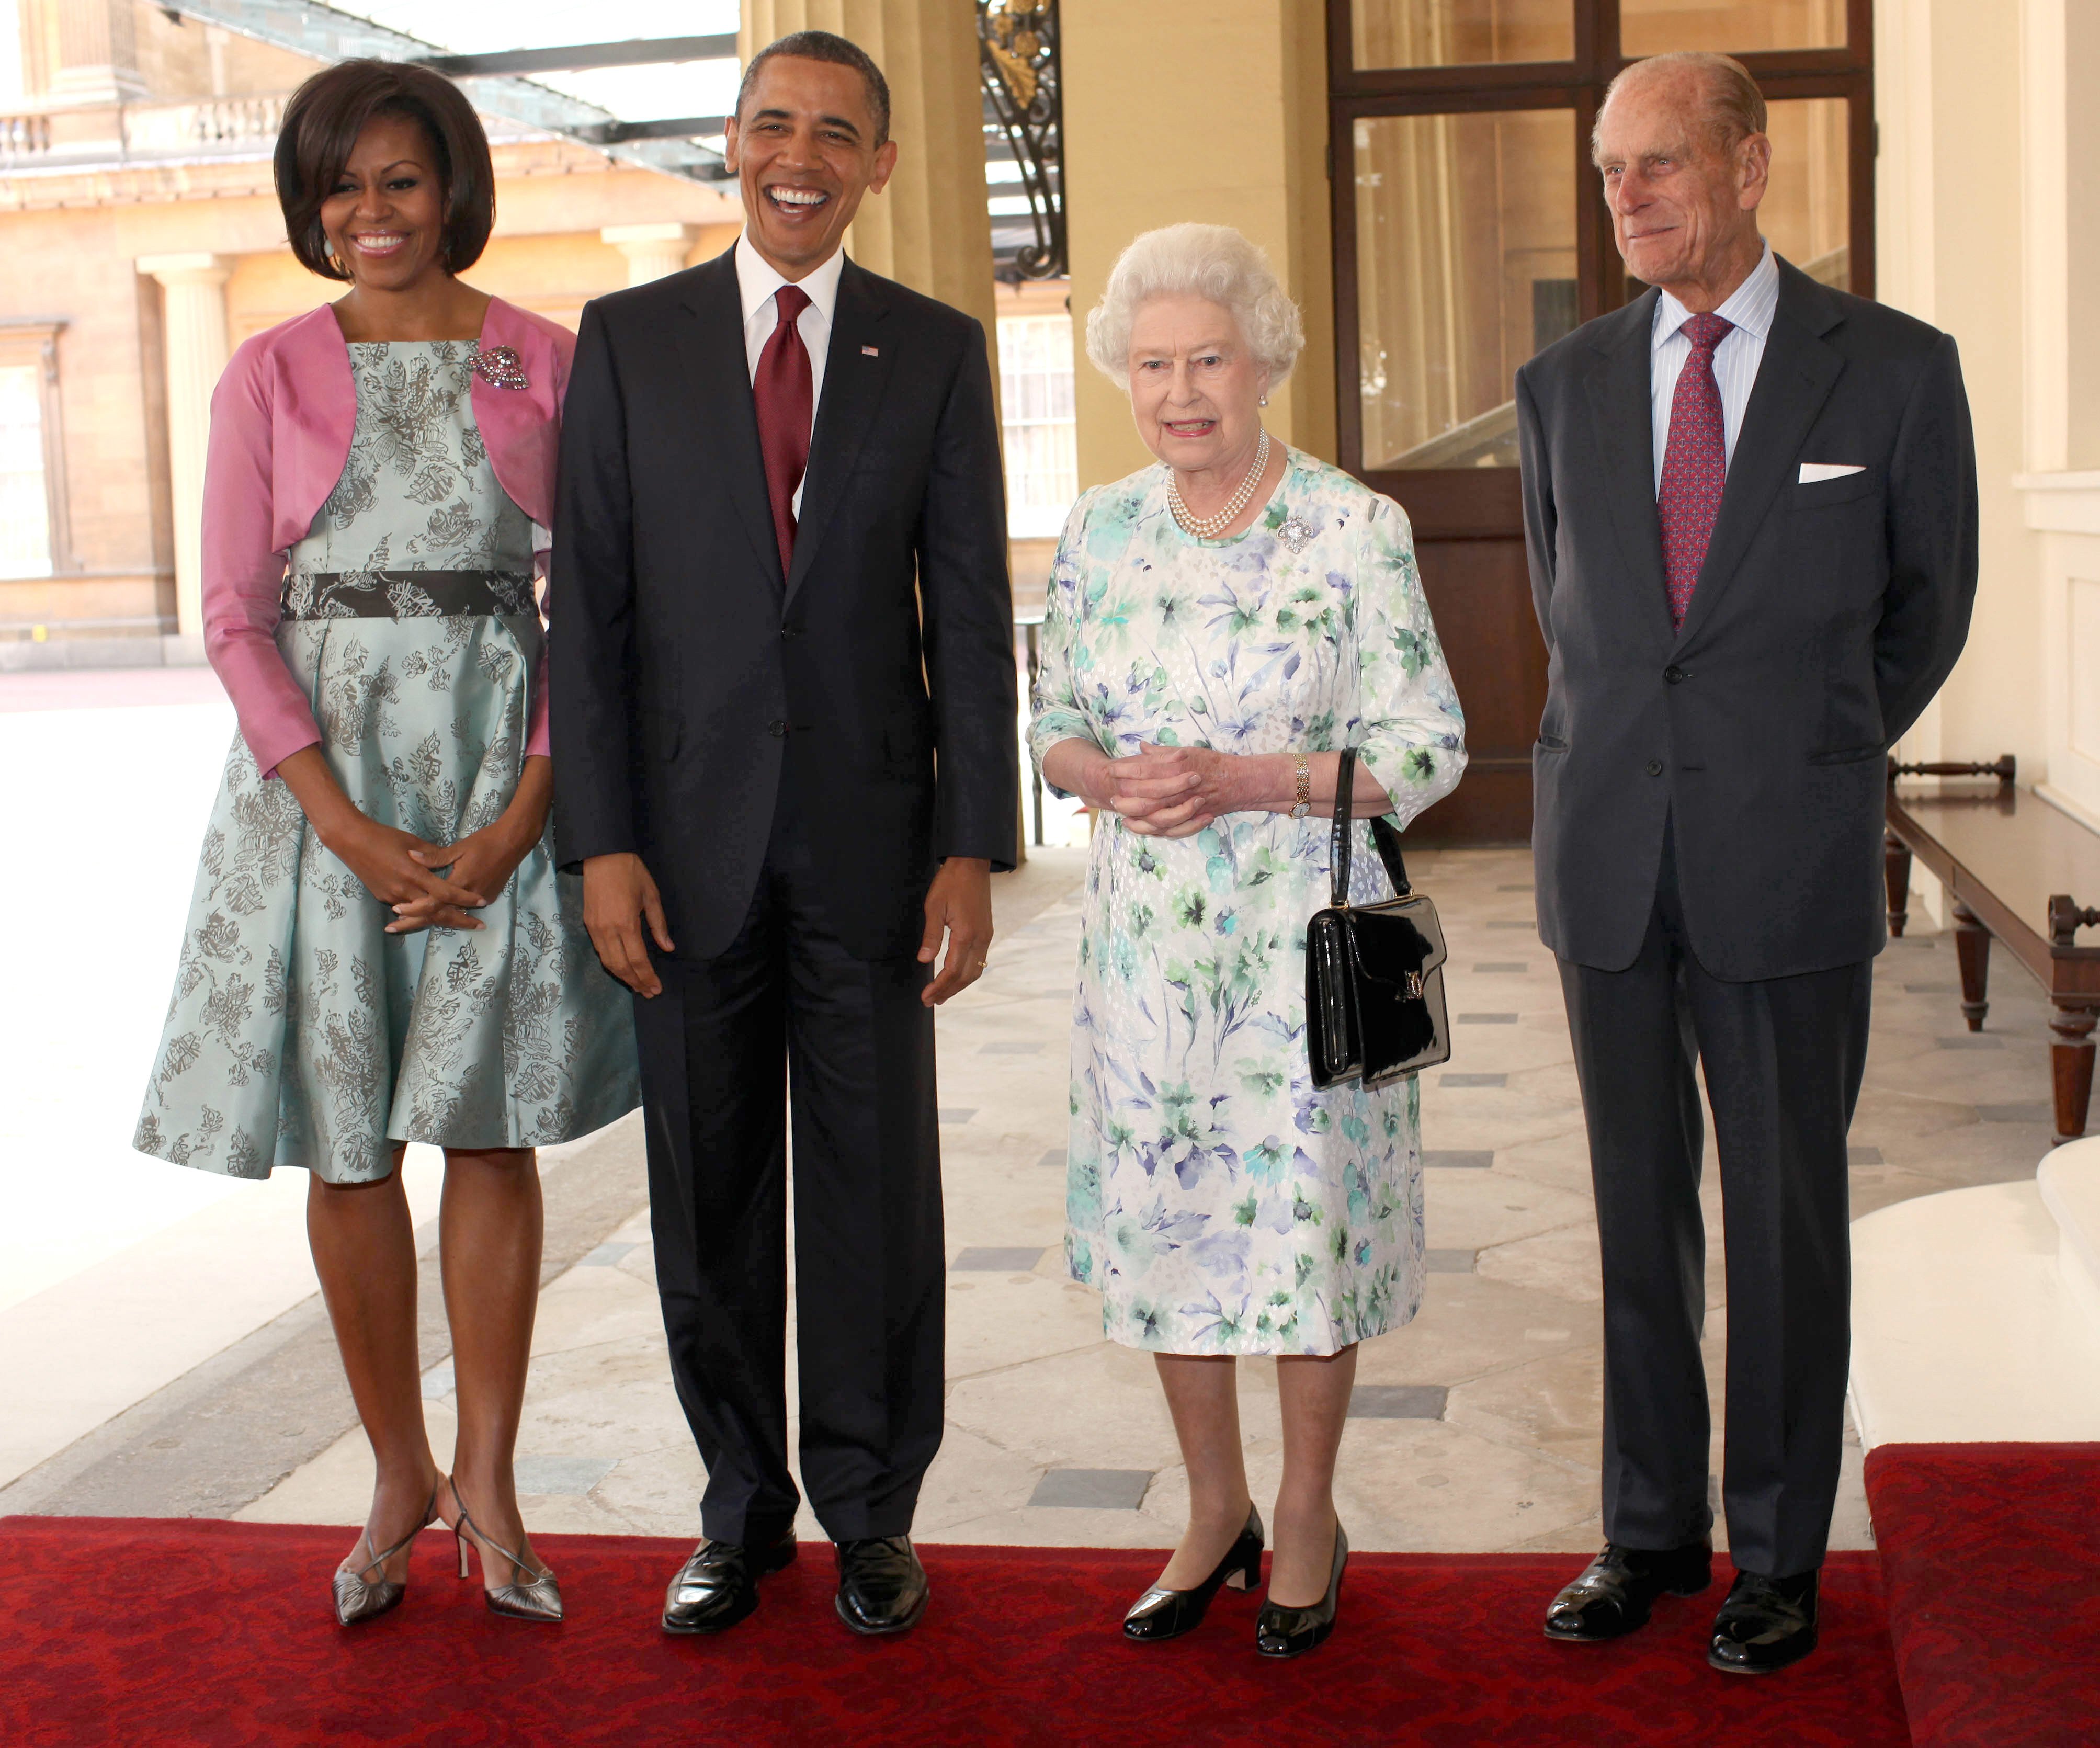 Former President Barack Obama, Michelle Obama, Queen Elizabeth II and Prince Philip, pose for a photograph at Buckingham Palace on May 24, 2011 in London, England. | Photo: Getty Images